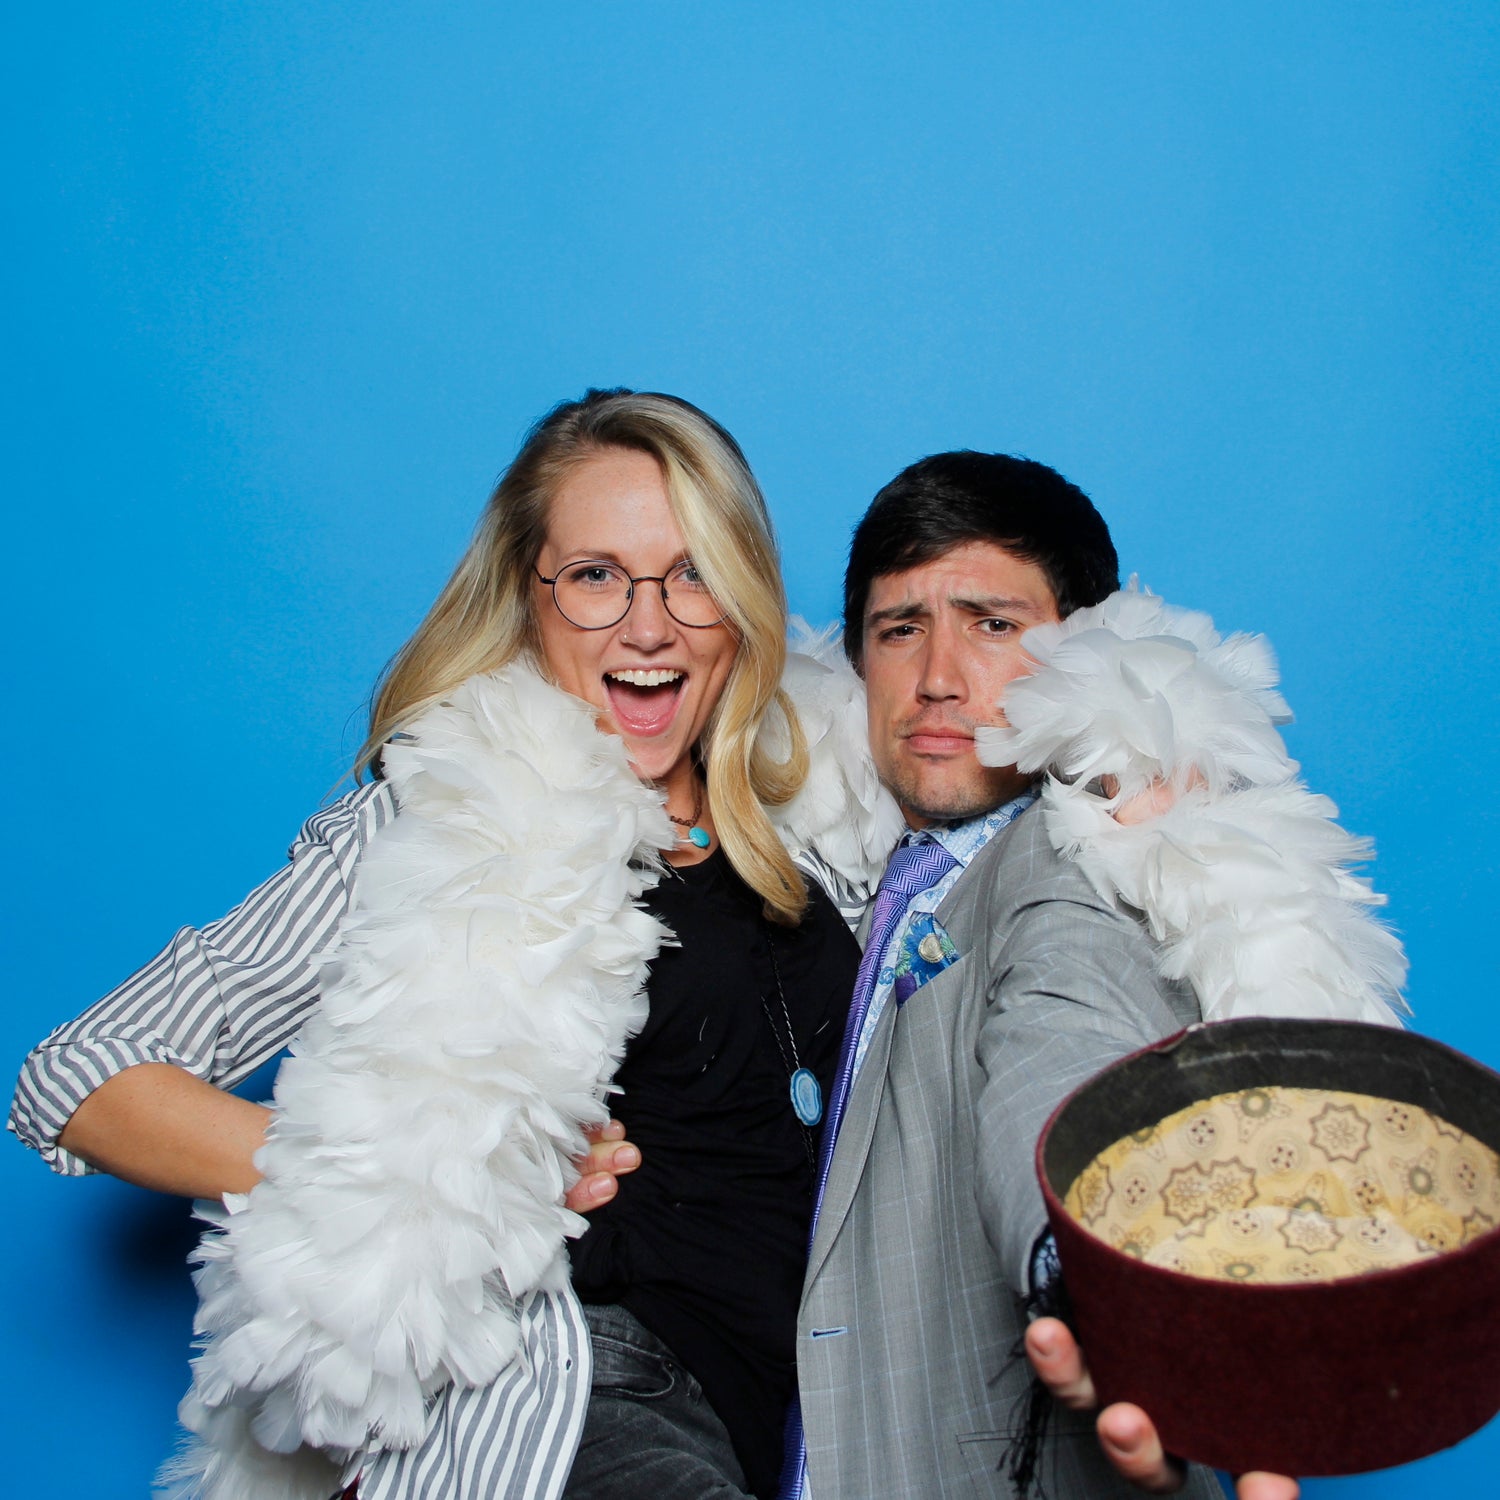 Photo booth with blue background and boa props